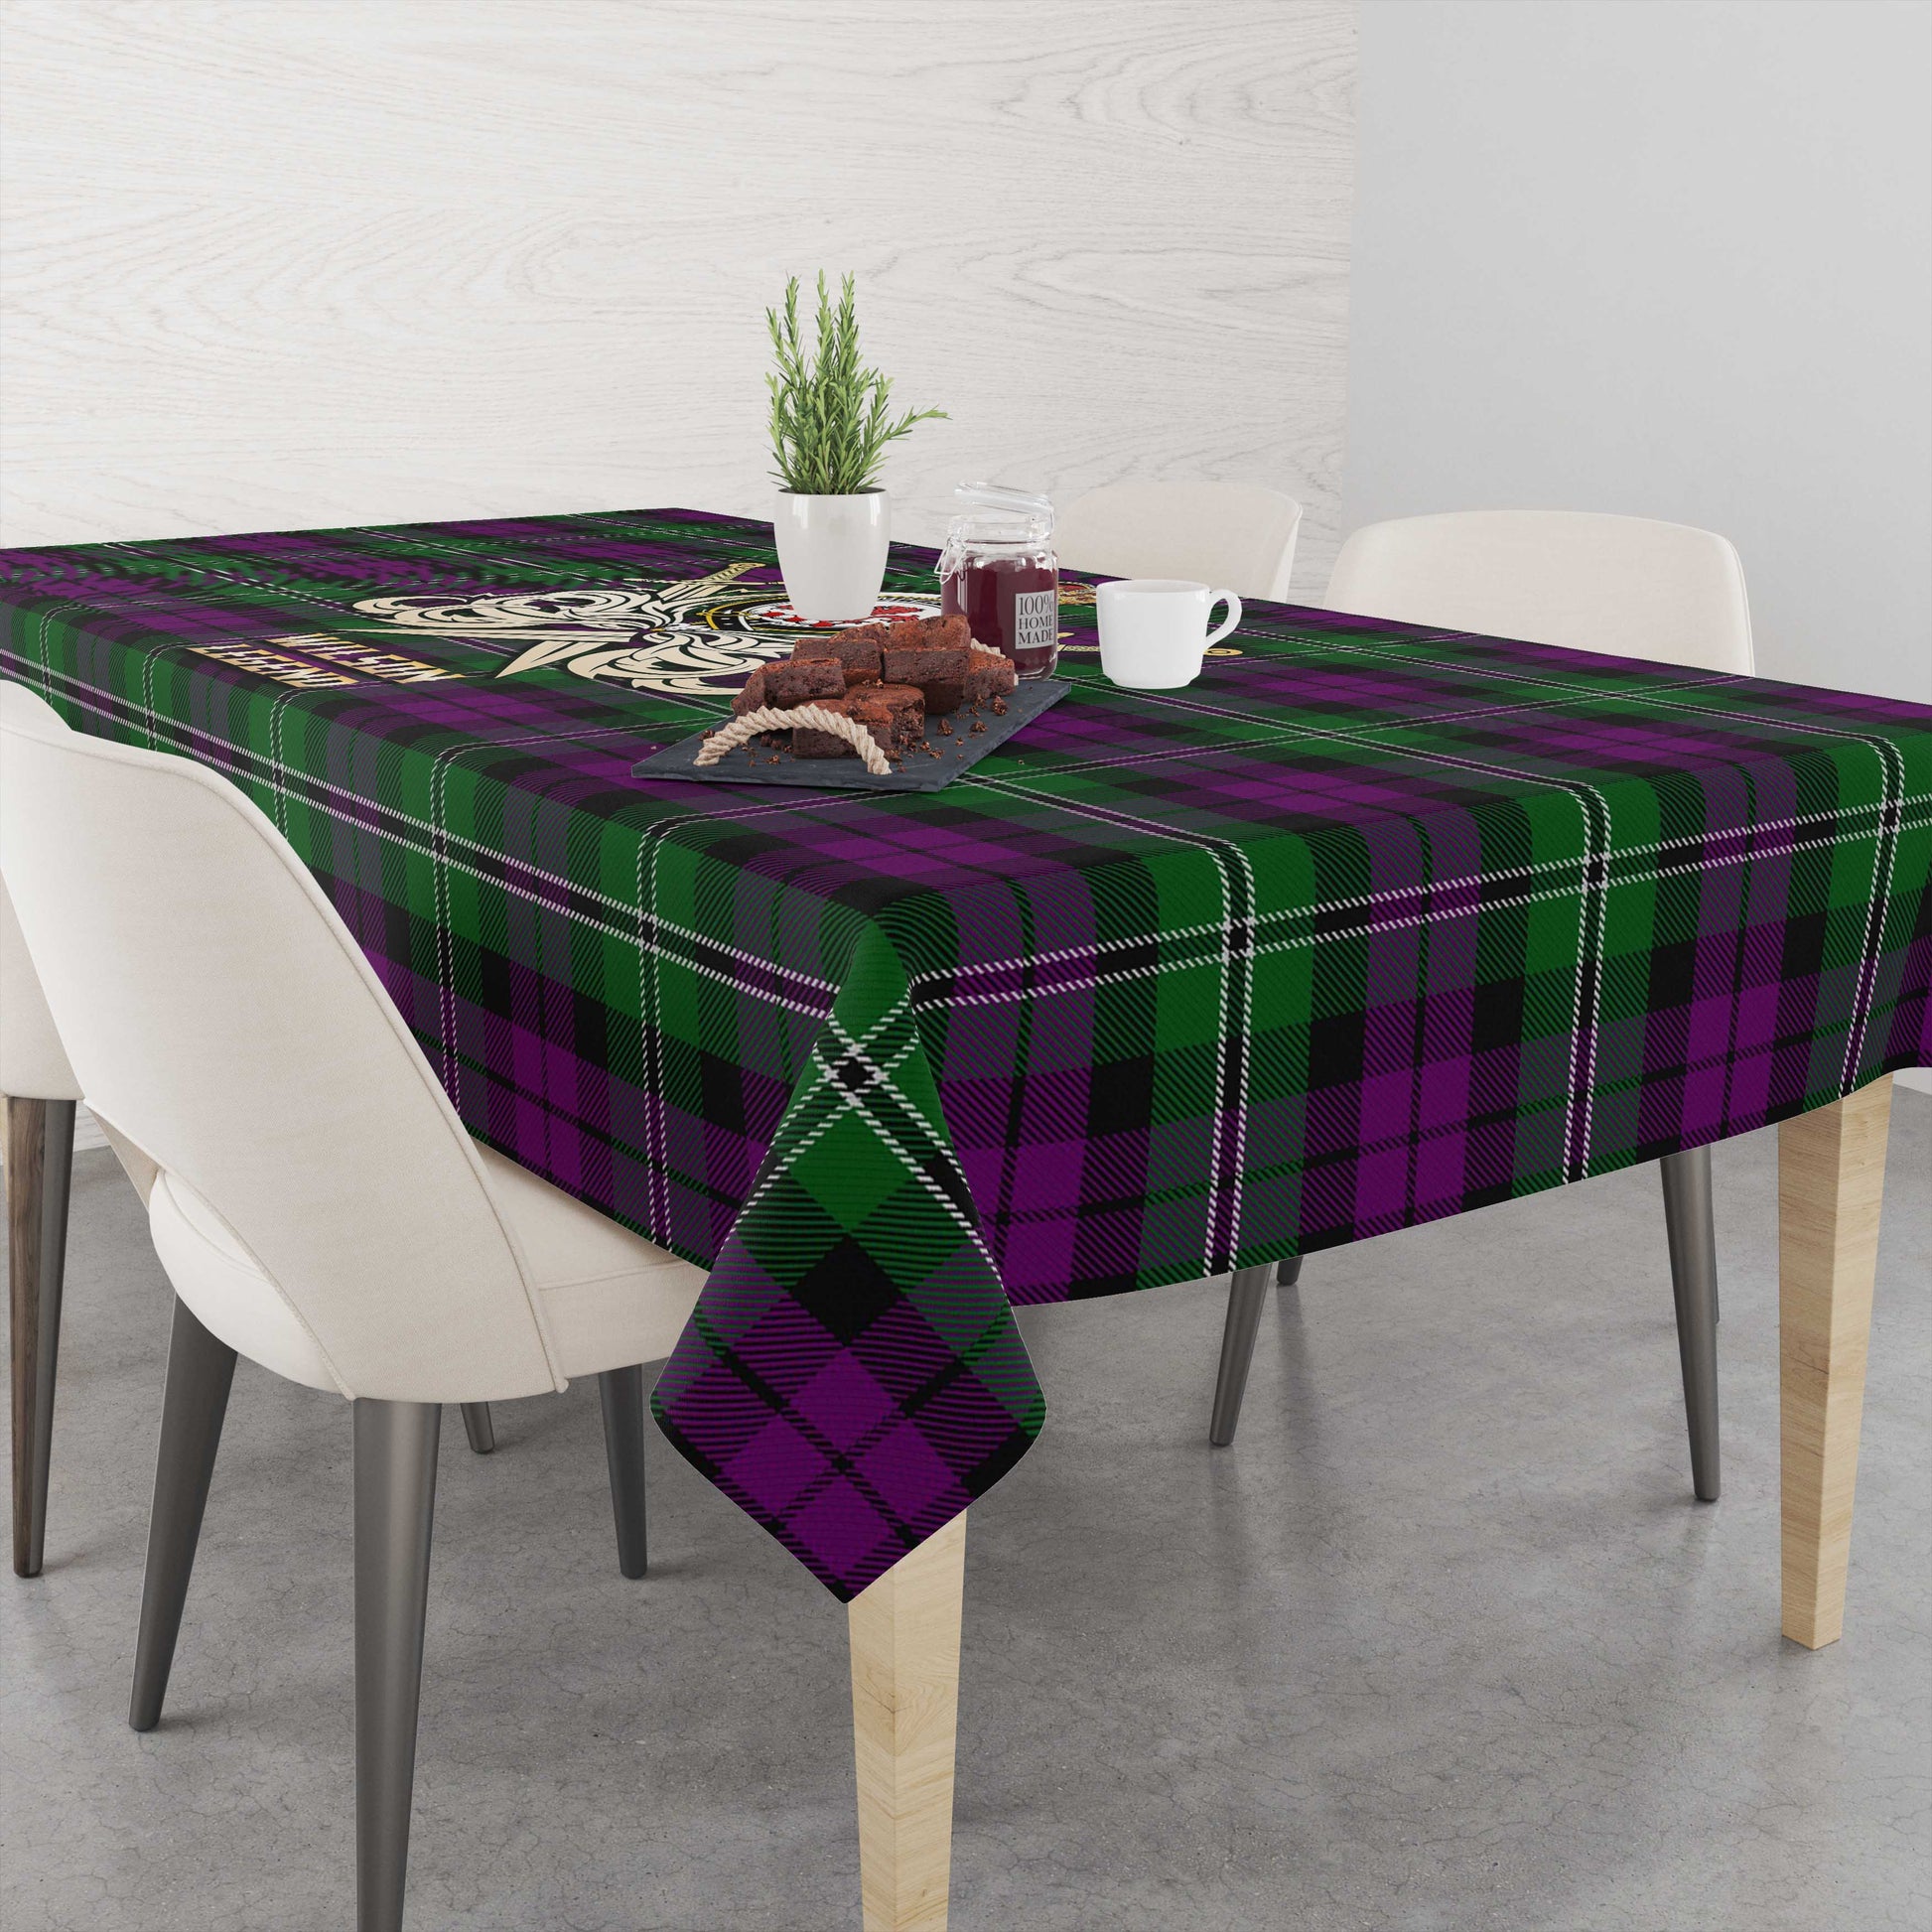 Tartan Vibes Clothing Wilson Tartan Tablecloth with Clan Crest and the Golden Sword of Courageous Legacy